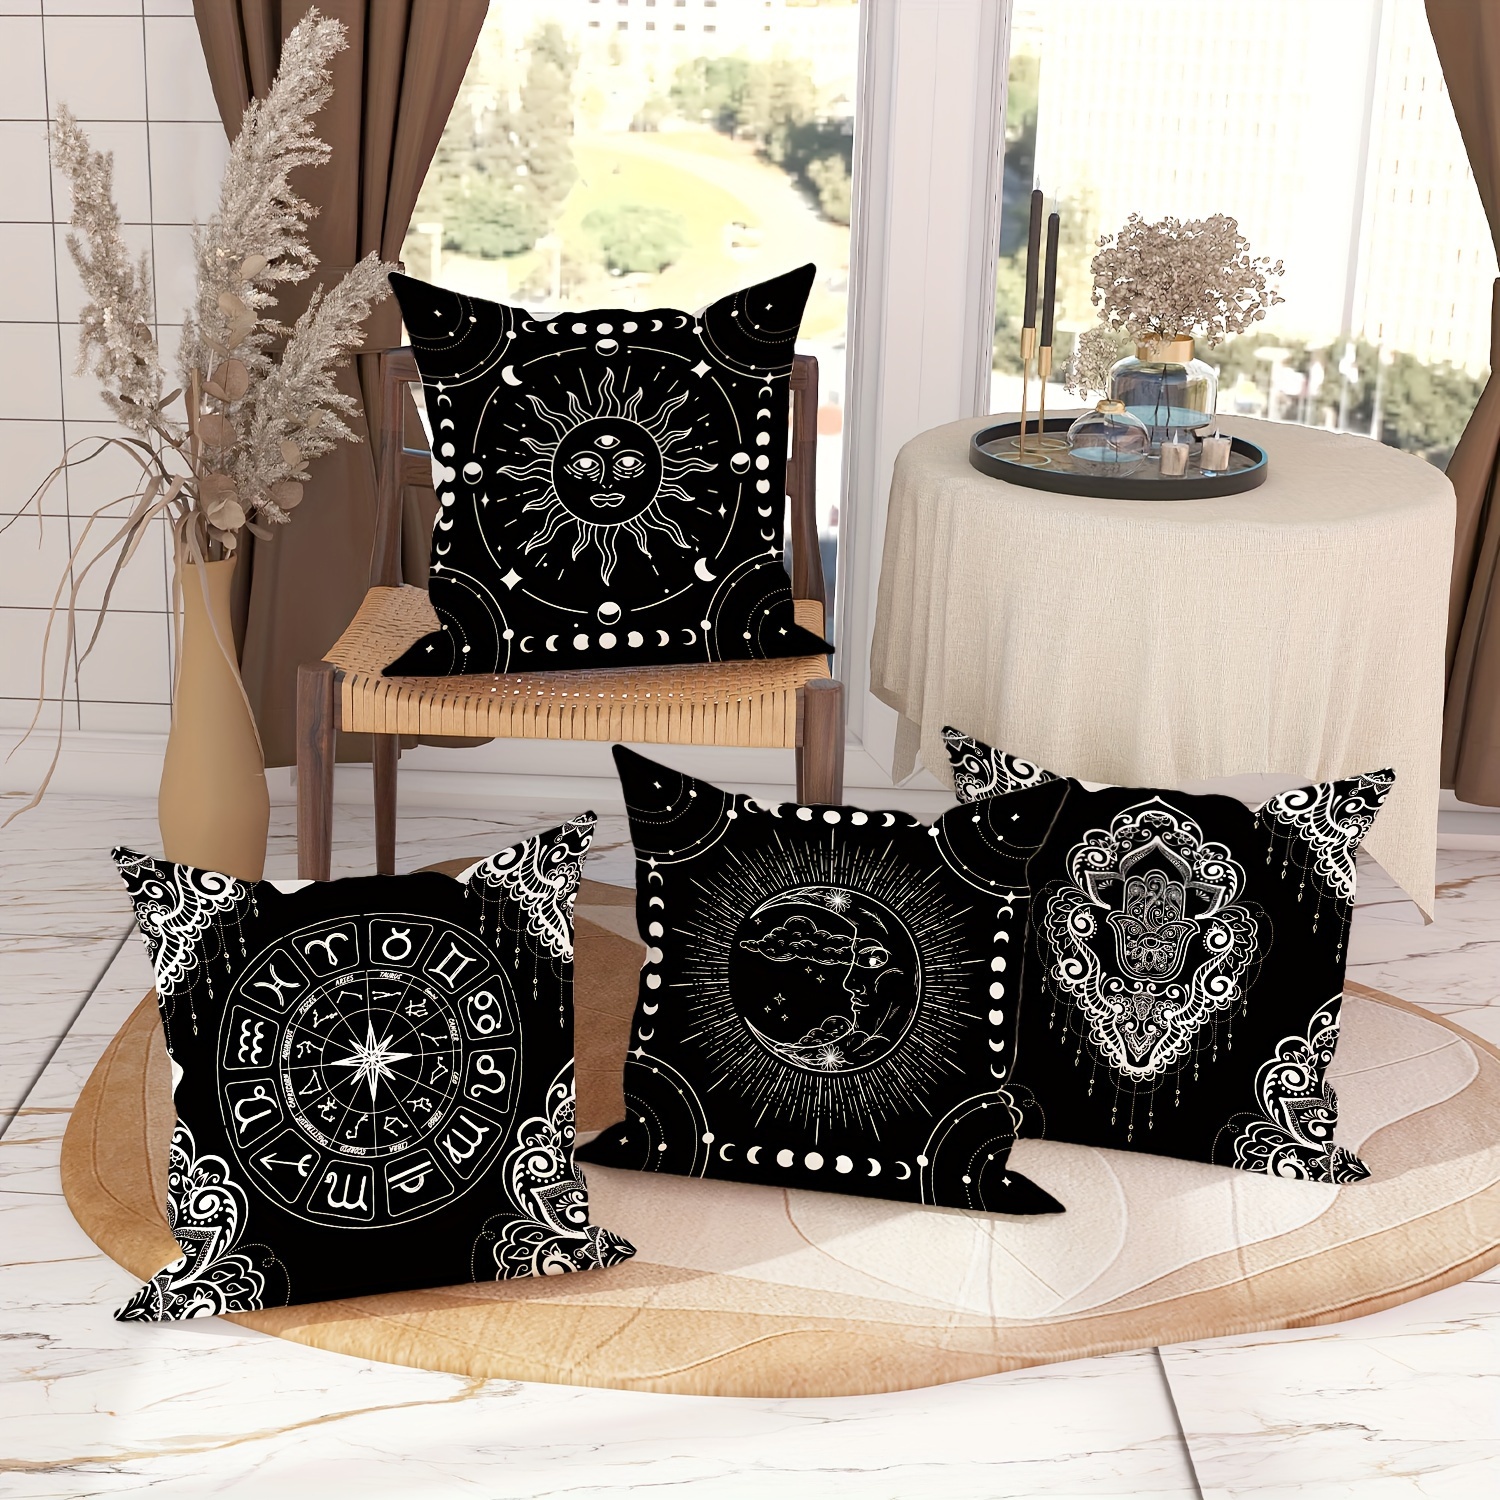 

Bohemian Velvet Throw Pillow Covers - Witch, Sun, Moon, Constellation, Floral Pattern - Black & White 18x18 Inch Cushion Cases For Living Room, Bedroom, Sofa Bed - Zippered, Machine Washable (4 Pack)